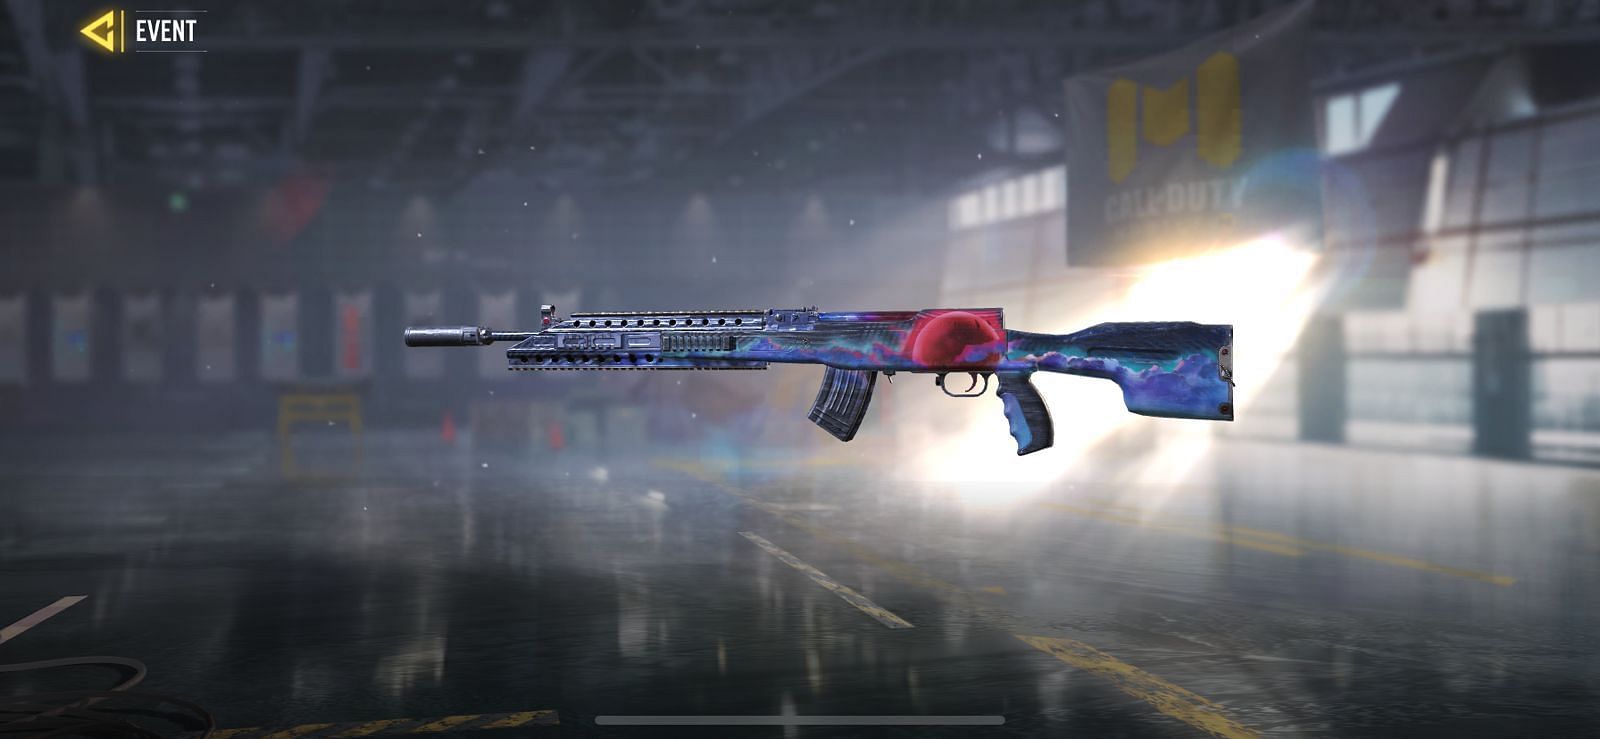 Unlock the new SKS-Crimson Sonata for free in COD Mobile from Seasonal challenges in Season 1(Image via Call of Duty Mobile)